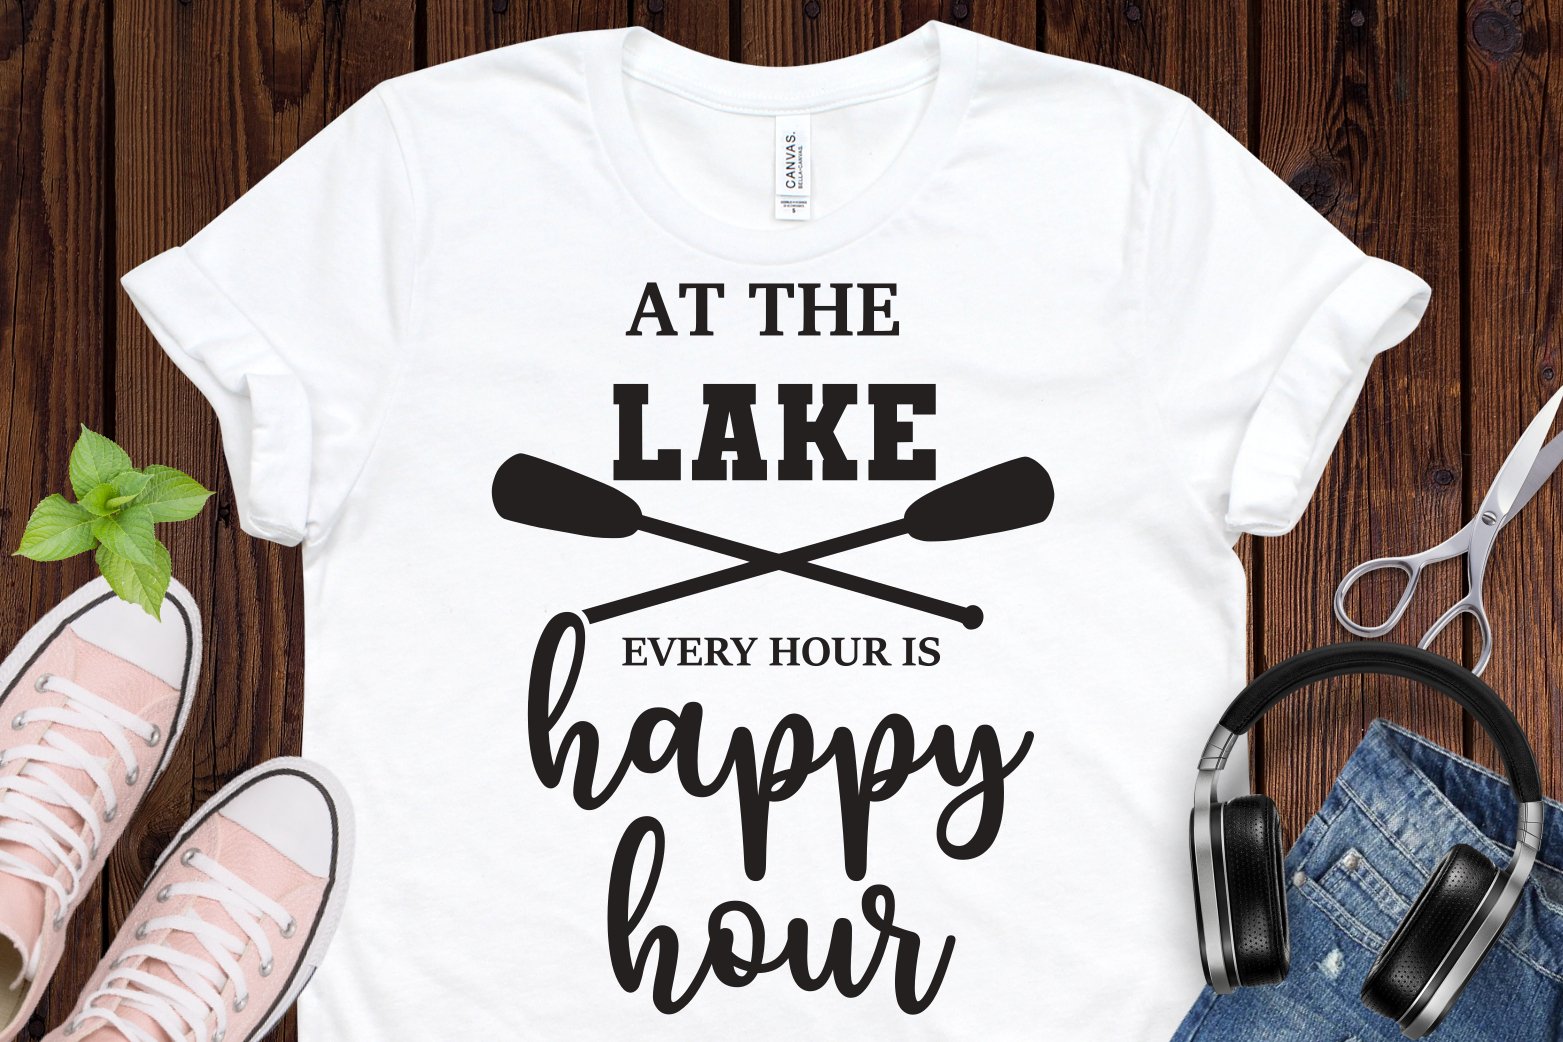 At the lake every hour is a happy hour.